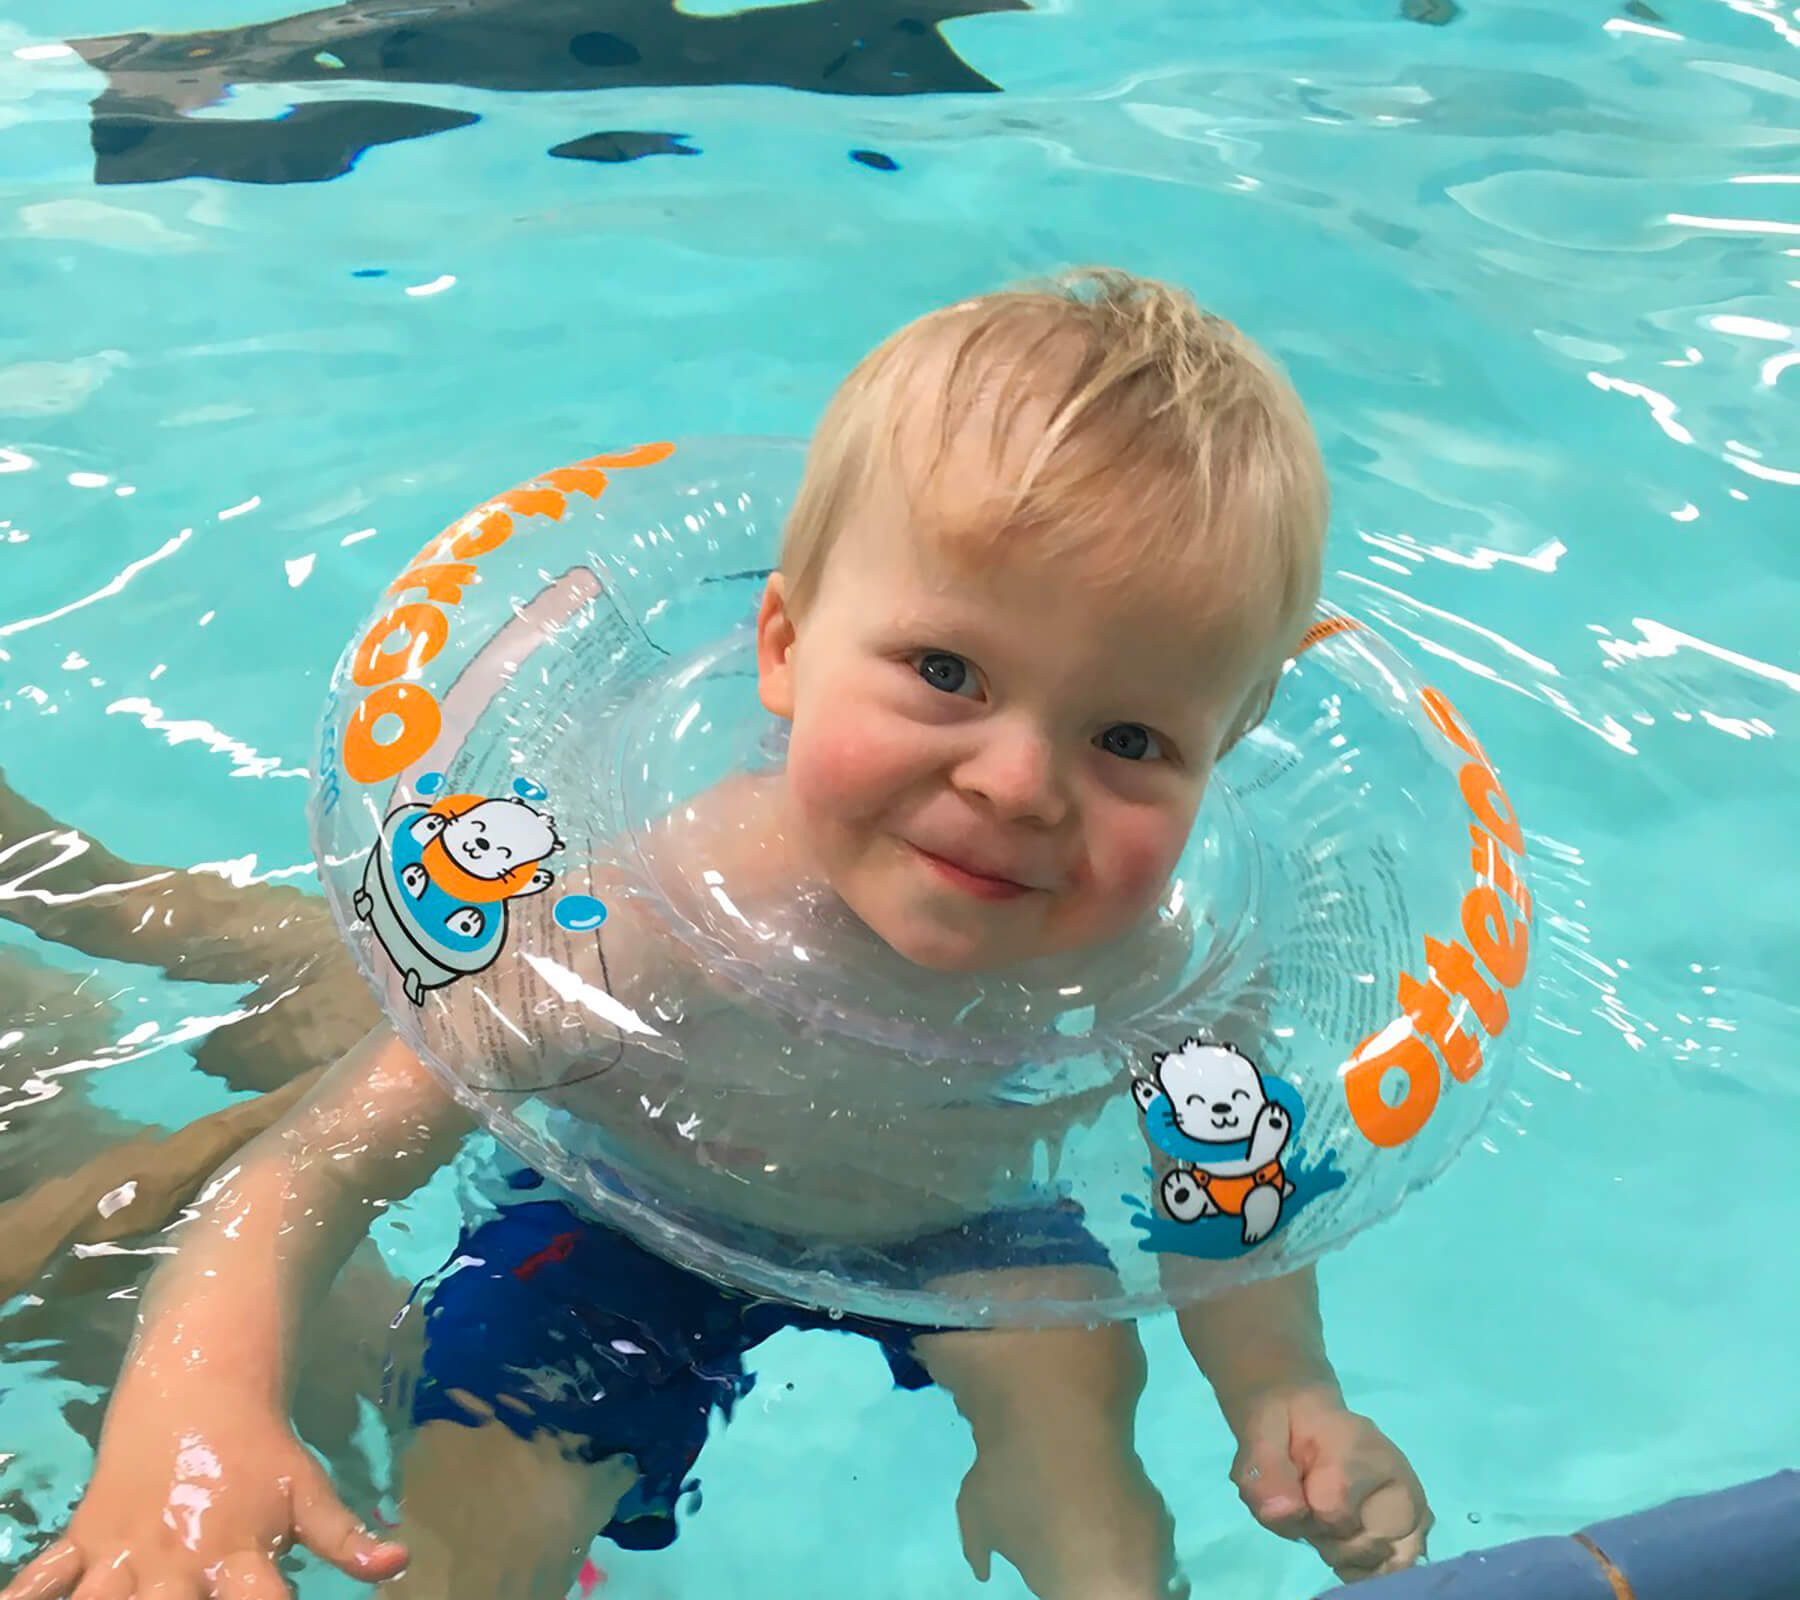 Toddler With Chromosomal Abnormality and Cerebral Palsy Uses Otteroo in Aquatic Therapy